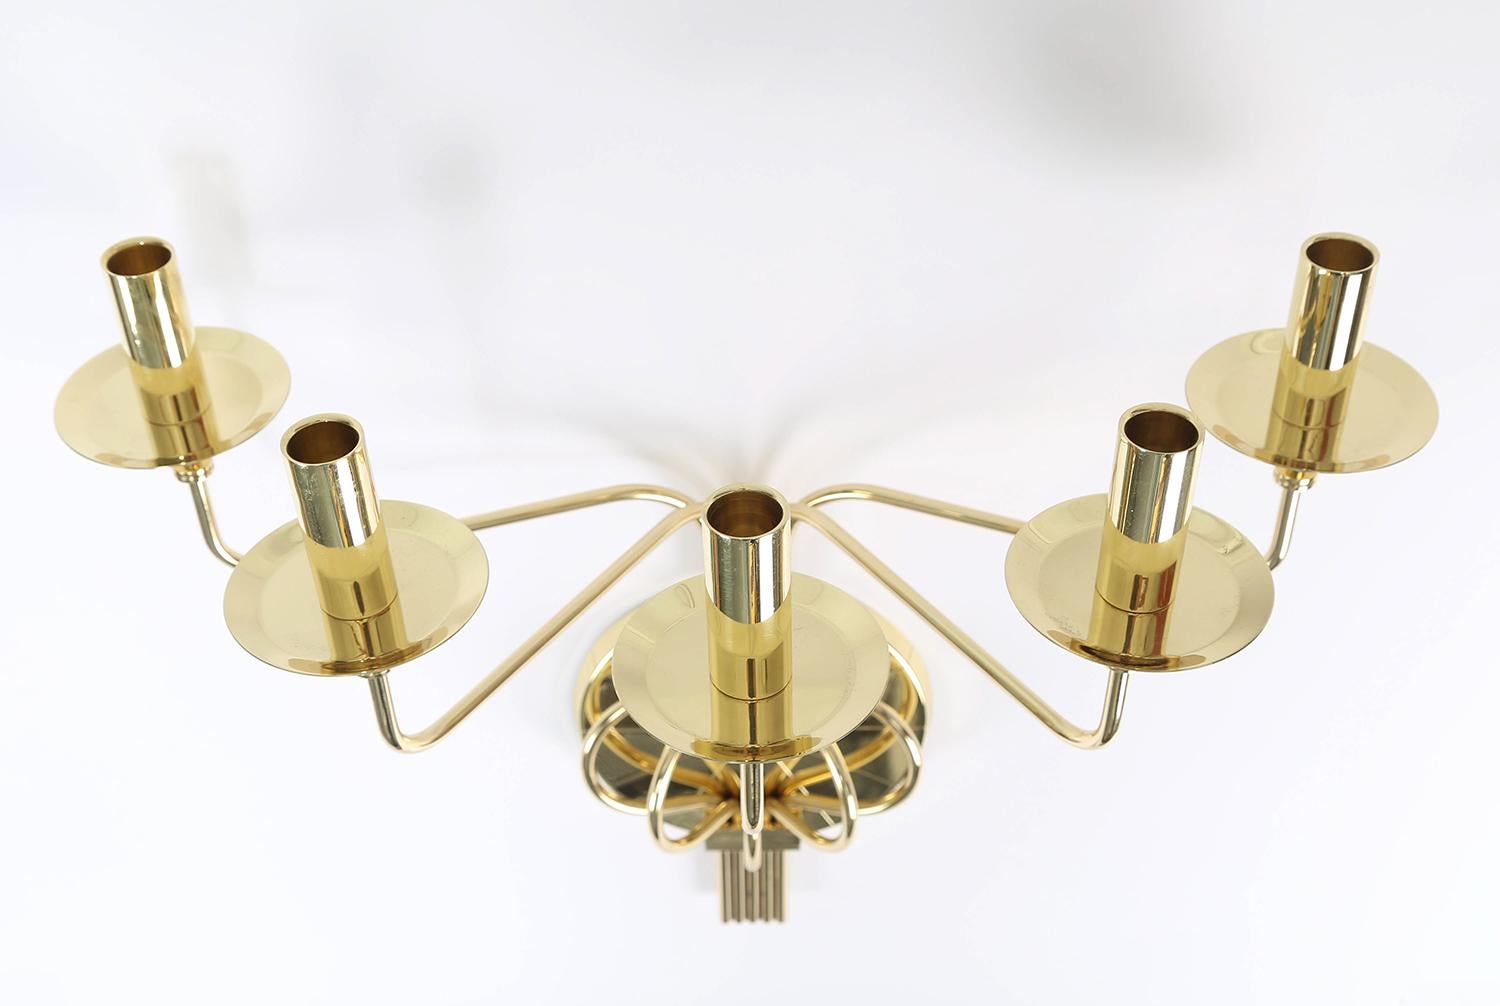 American Tommi Parzinger Pair of Impressive 5 Arm Wall Sconces in Polished Brass, 1950s For Sale